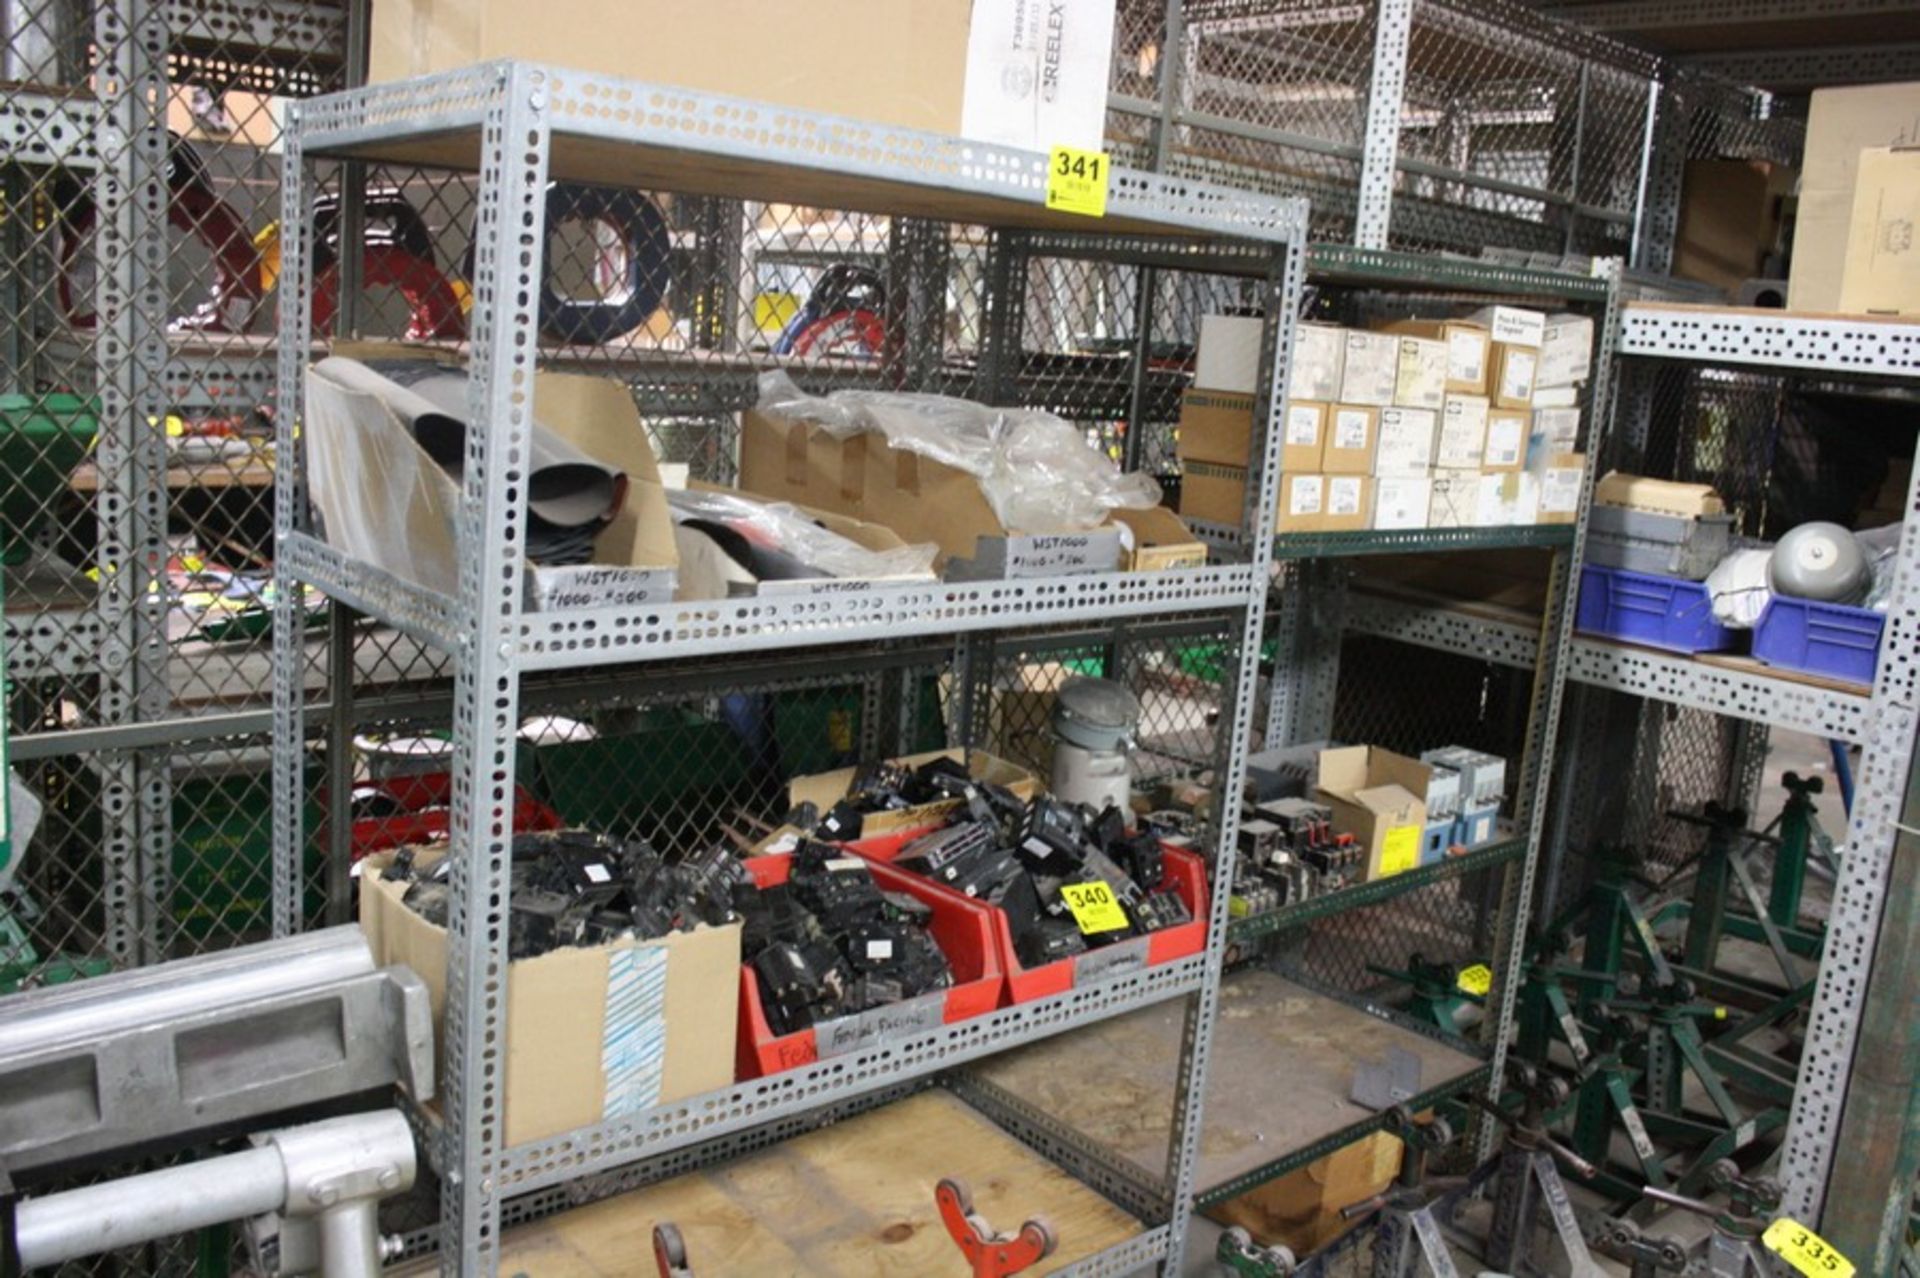 (2) SECTIONS OF ADJUSTABLE STEEL SHELVING UNITS